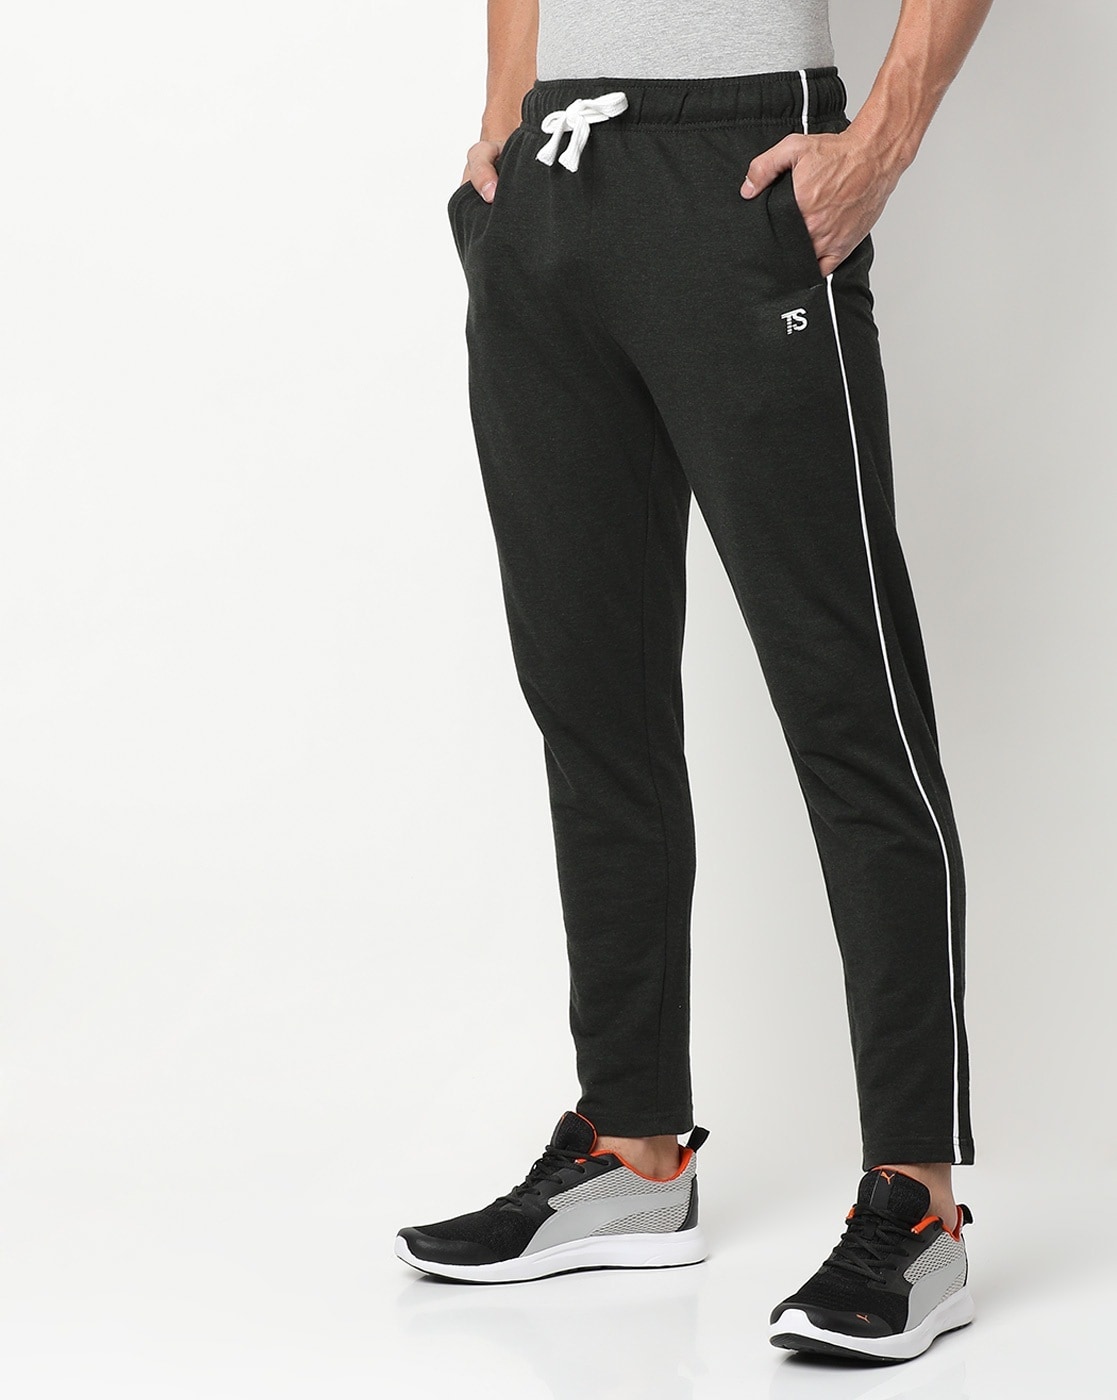 Buy Light grey Track Pants for Men by RED TAPE Online | Ajio.com